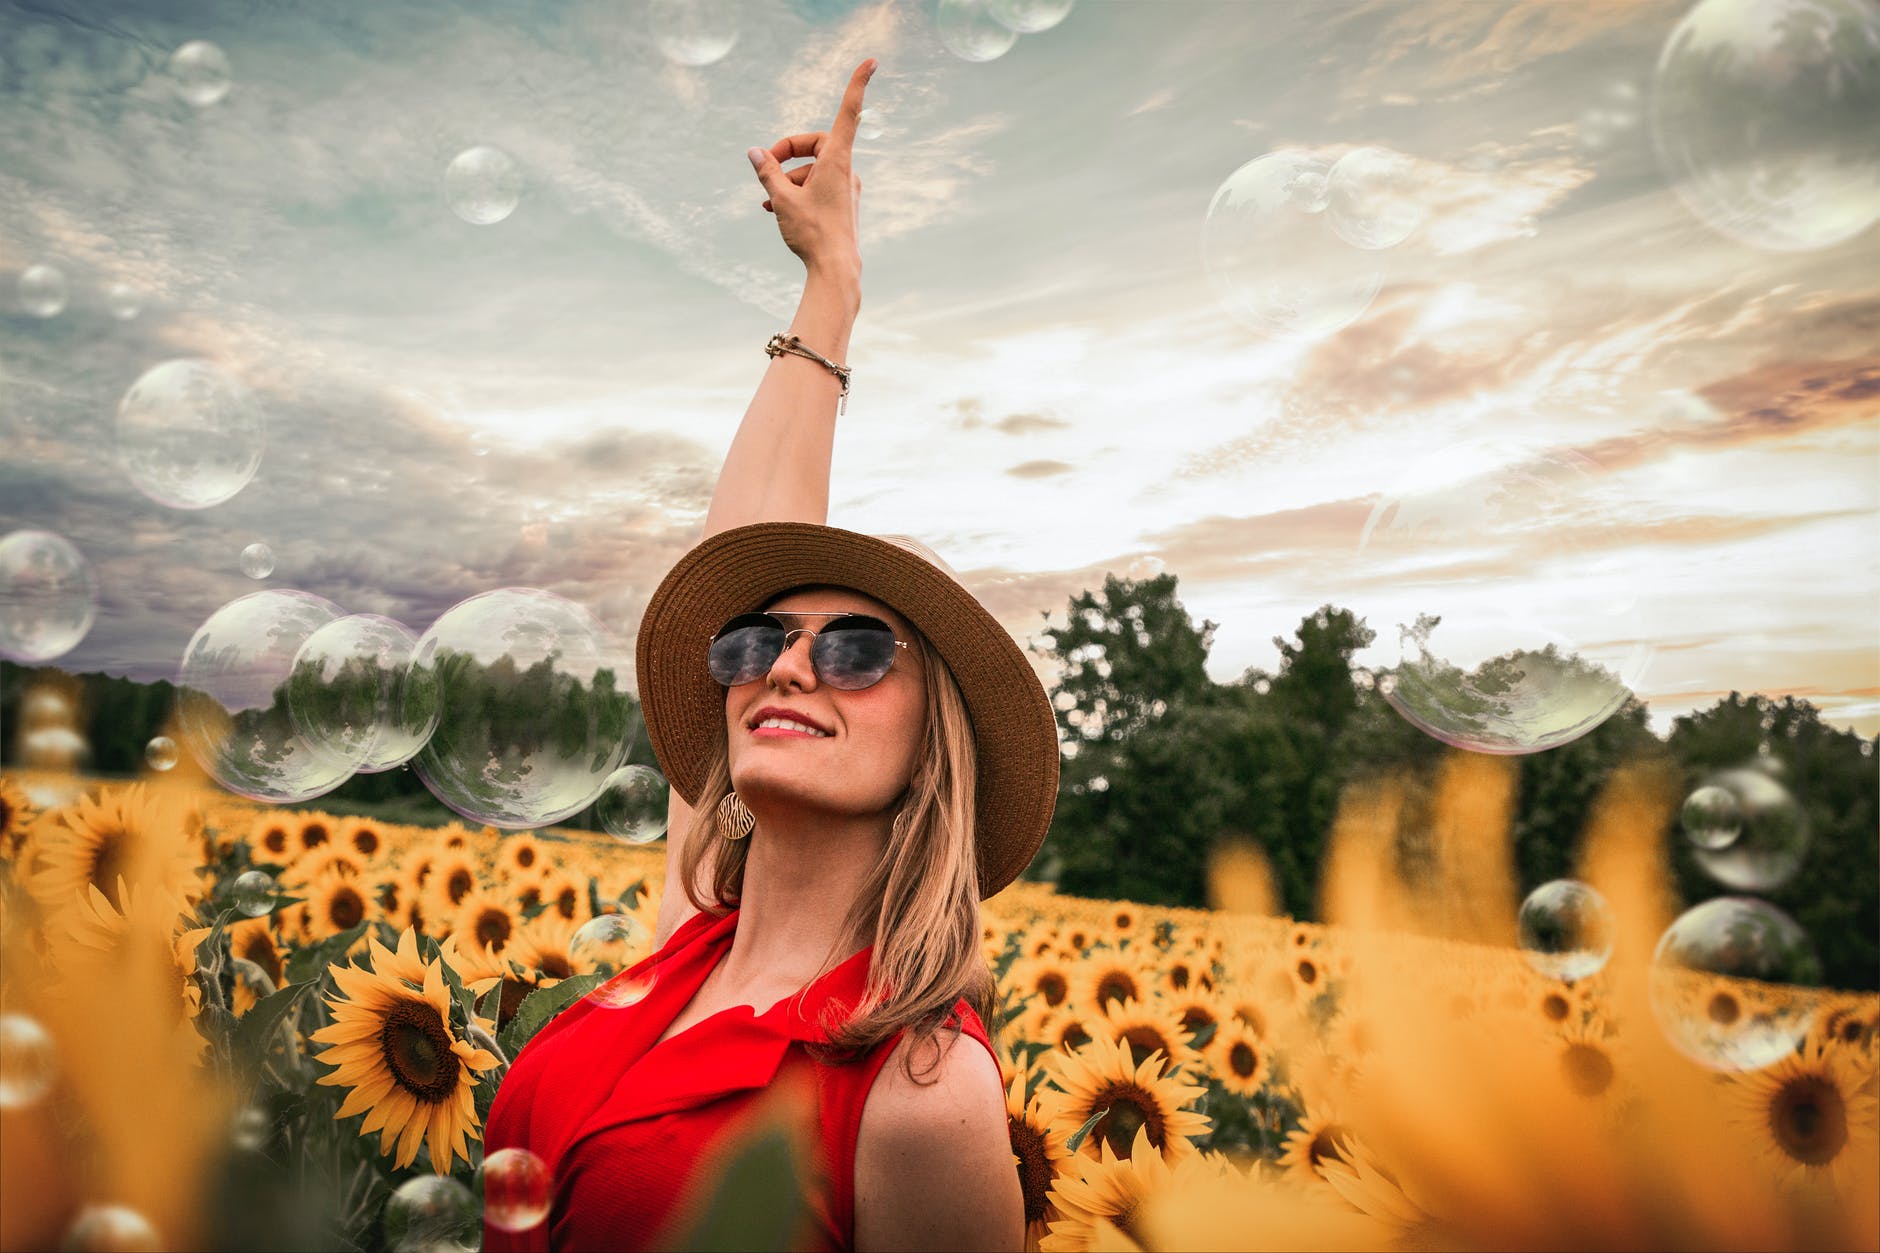 woman surrounded by sunflowers raising hand